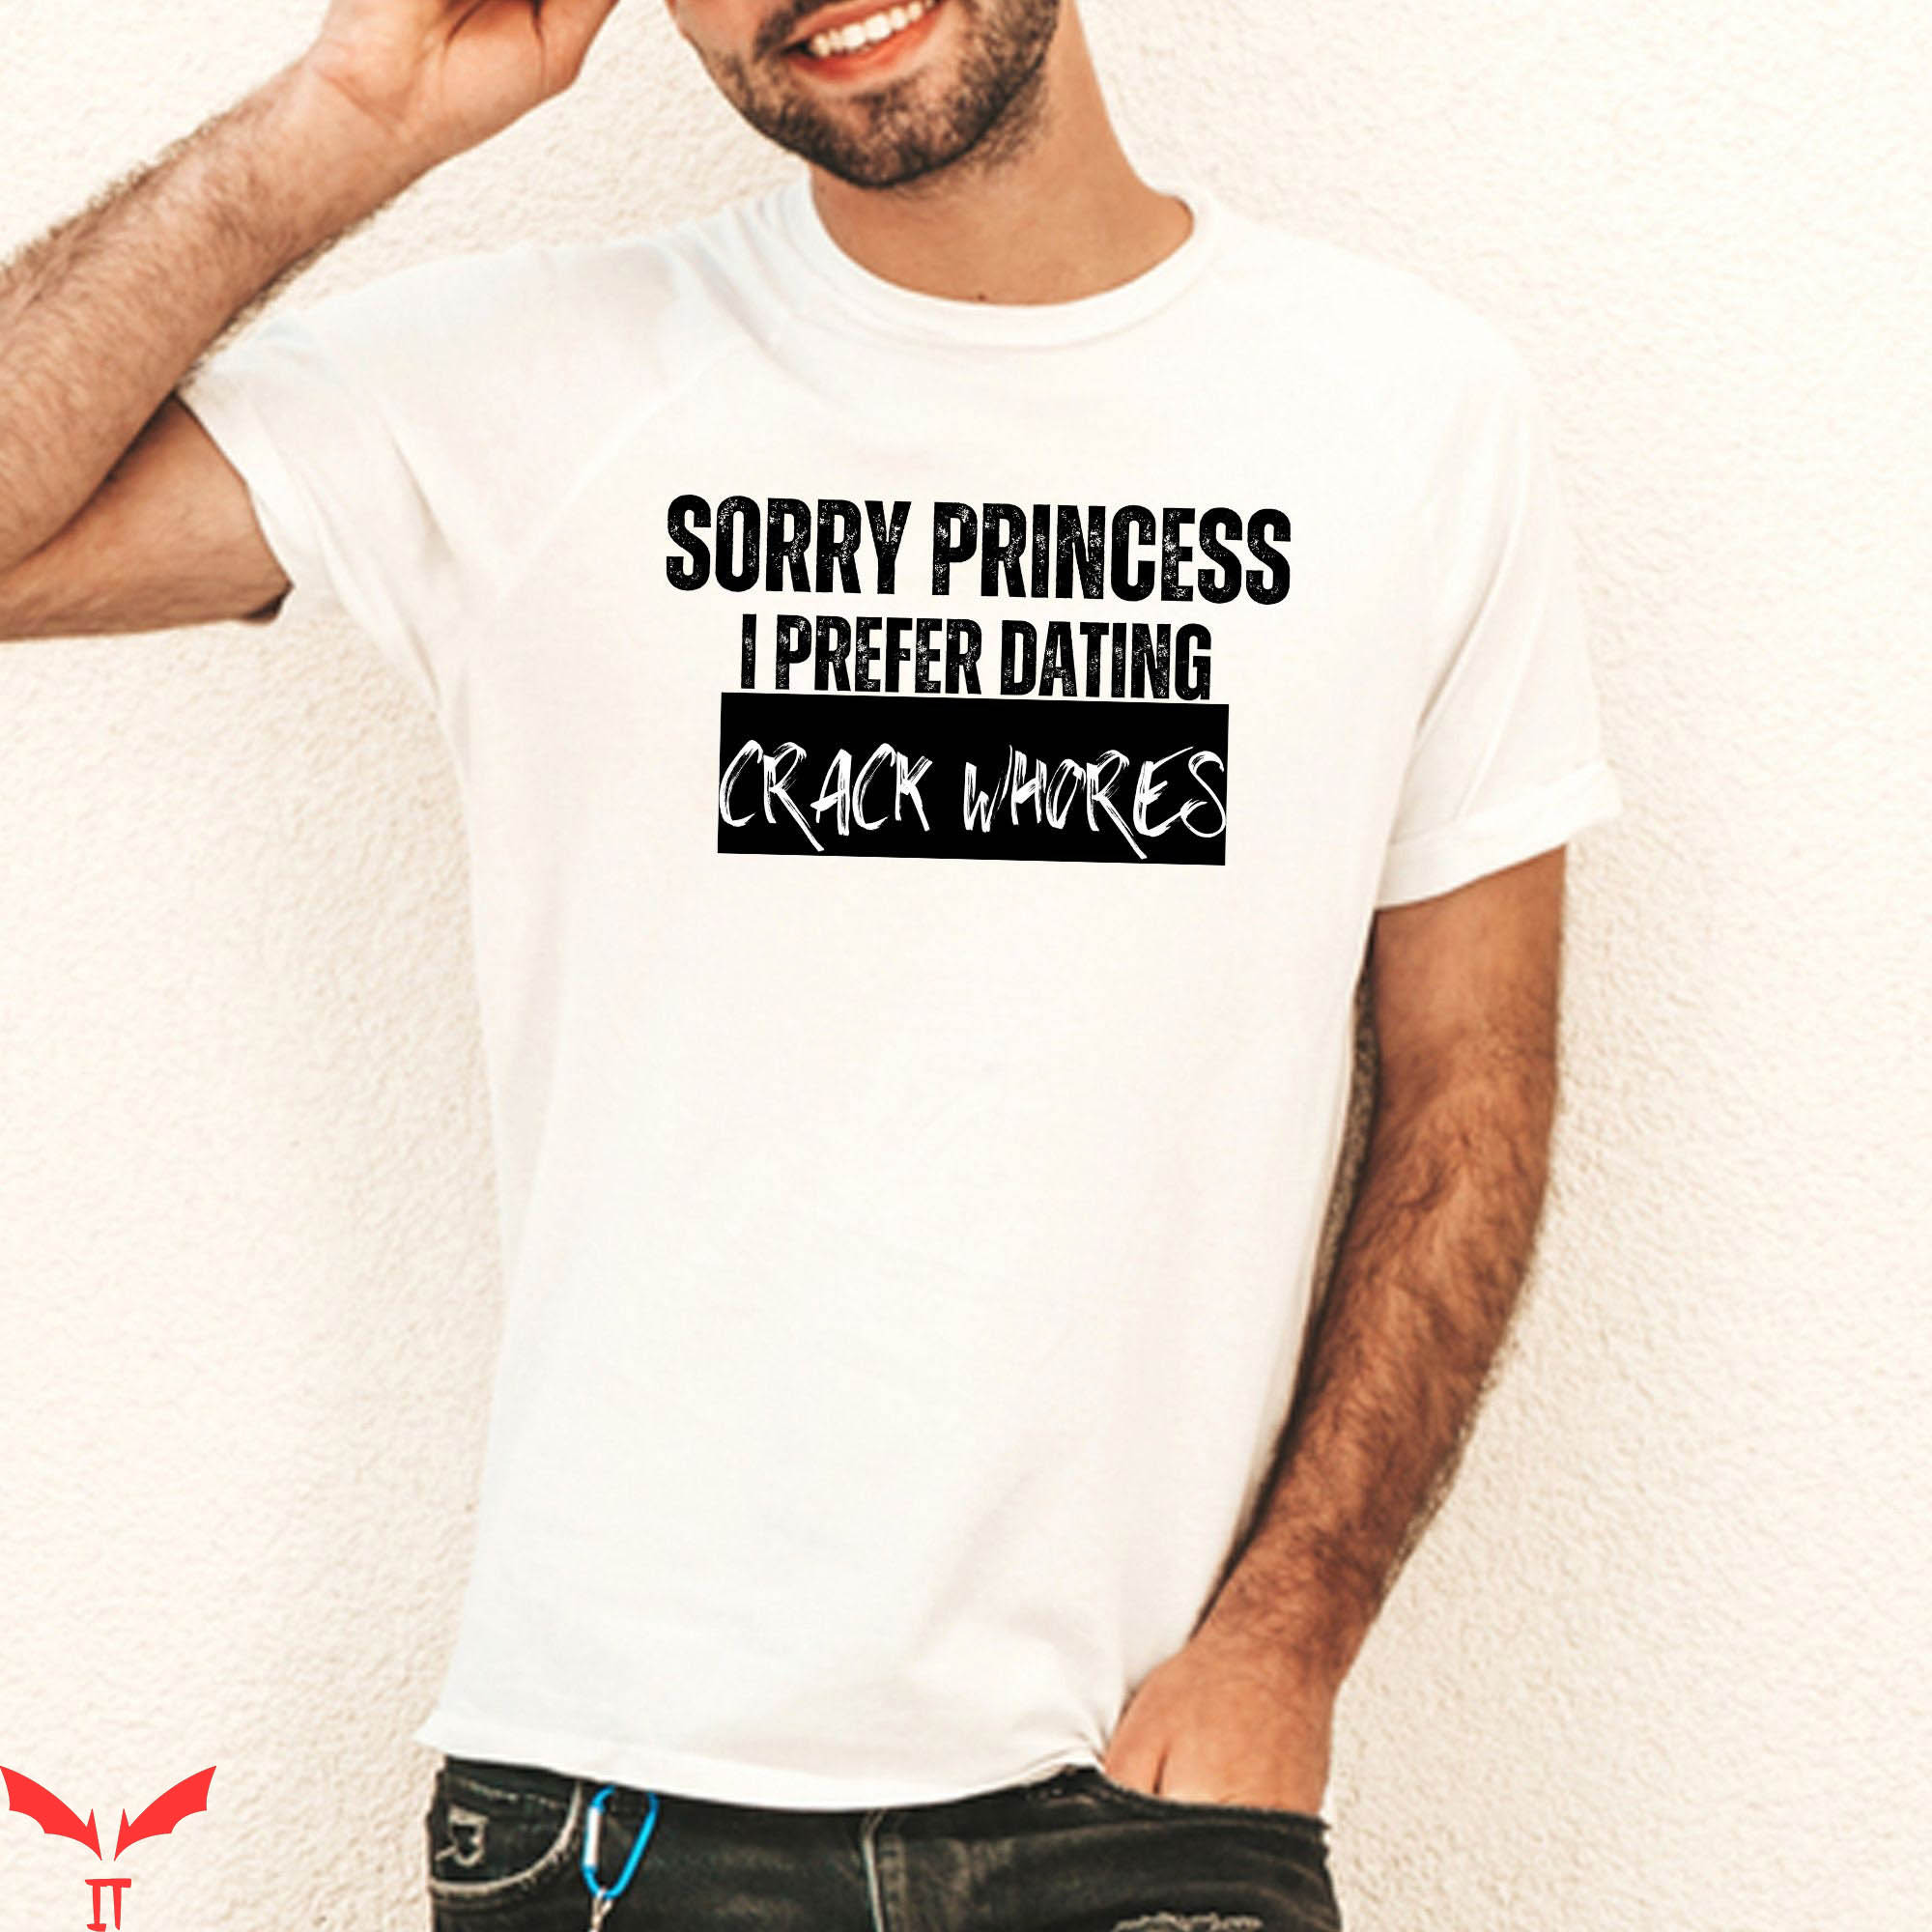 Sorry Princess I Only Date T-Shirt Funny Sarcastic Shirt